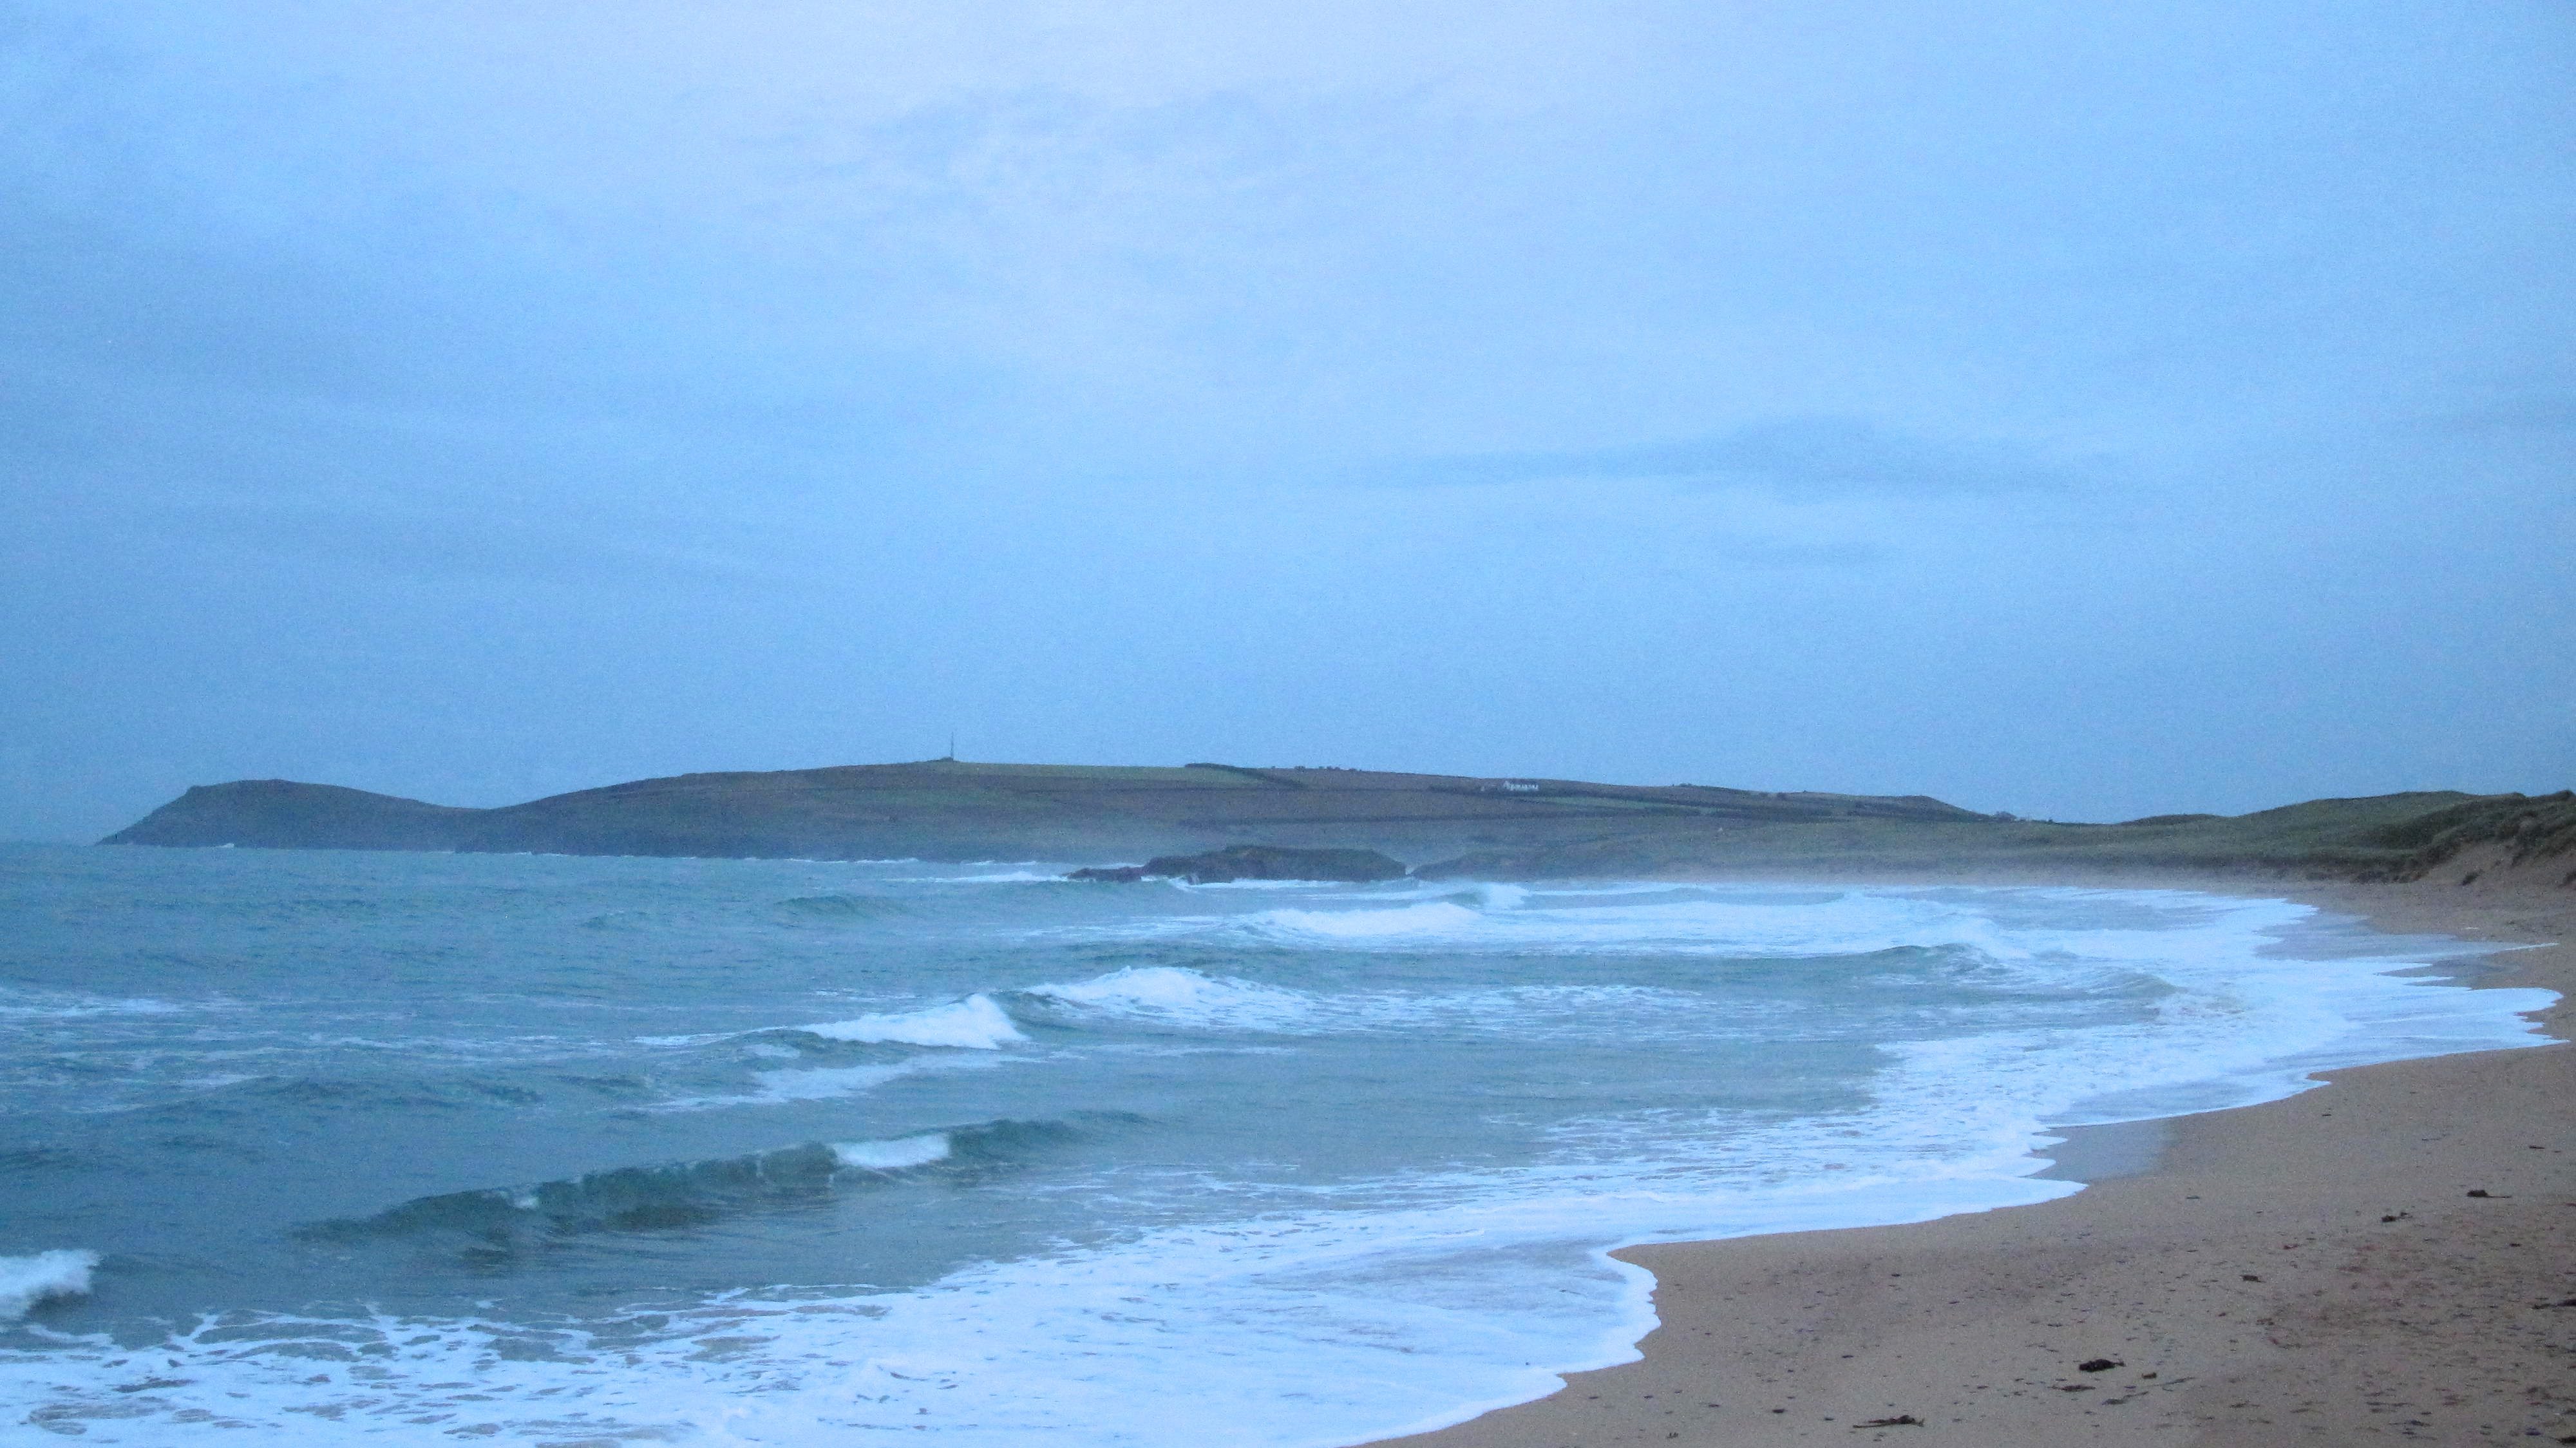 Surf Report for Tuesday 11th November 2014